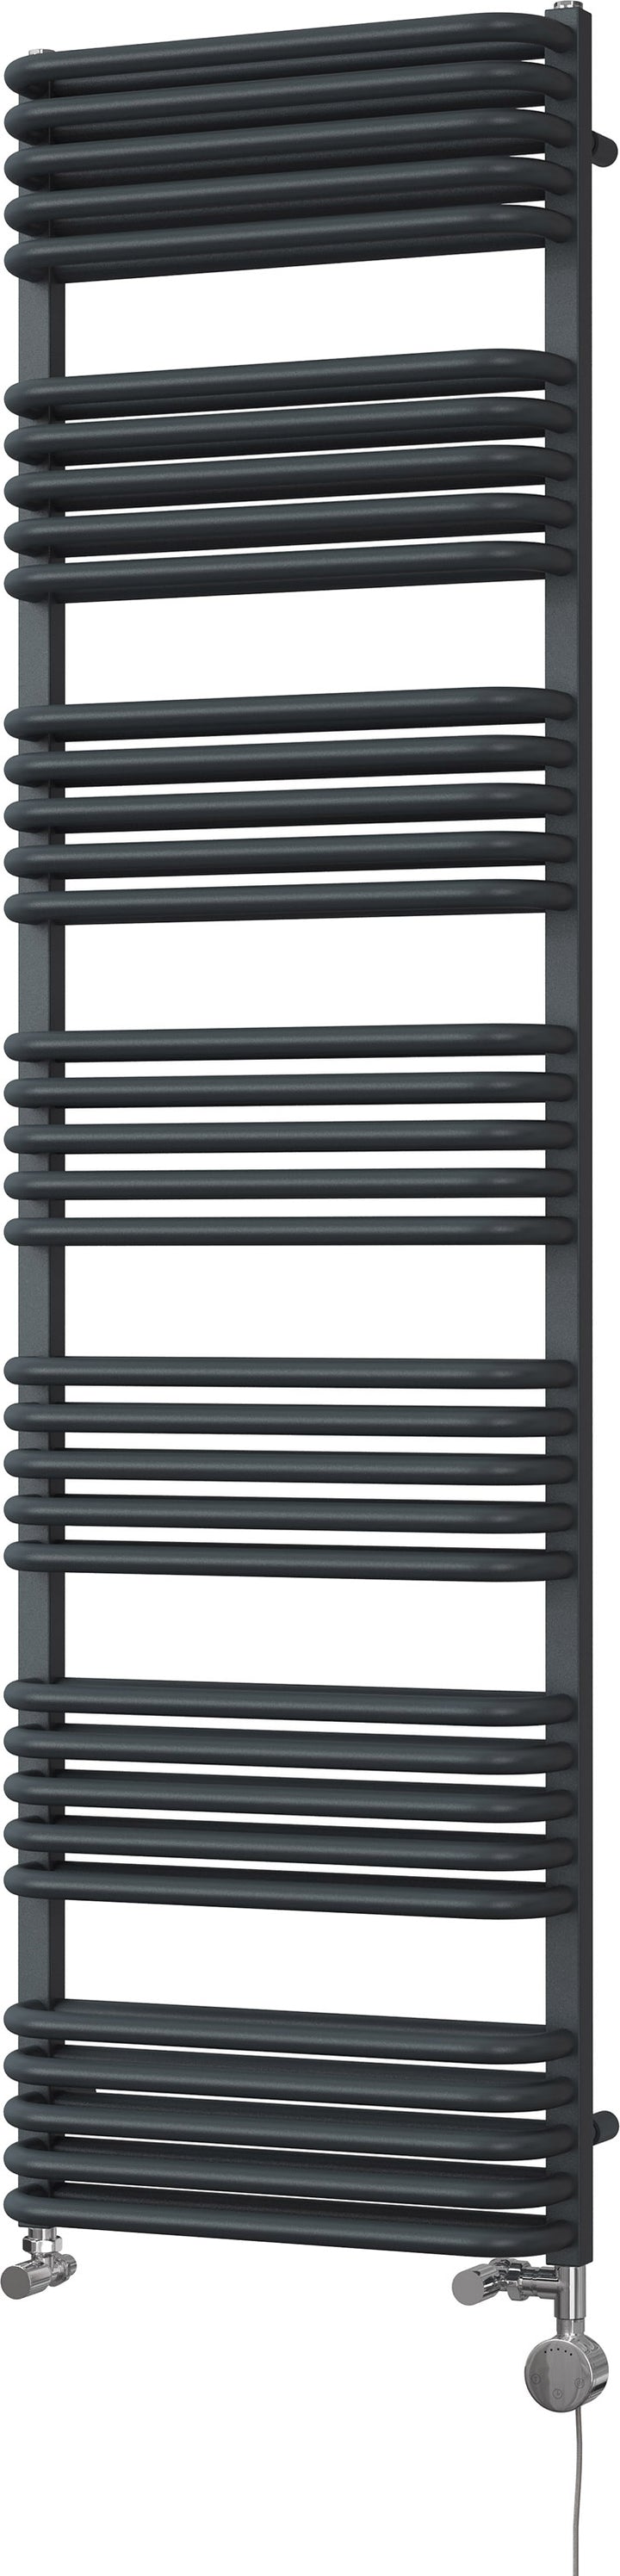 Crossmoor - Anthracite Dual Fuel Towel Rail H1800mm x W500mm Thermostatic